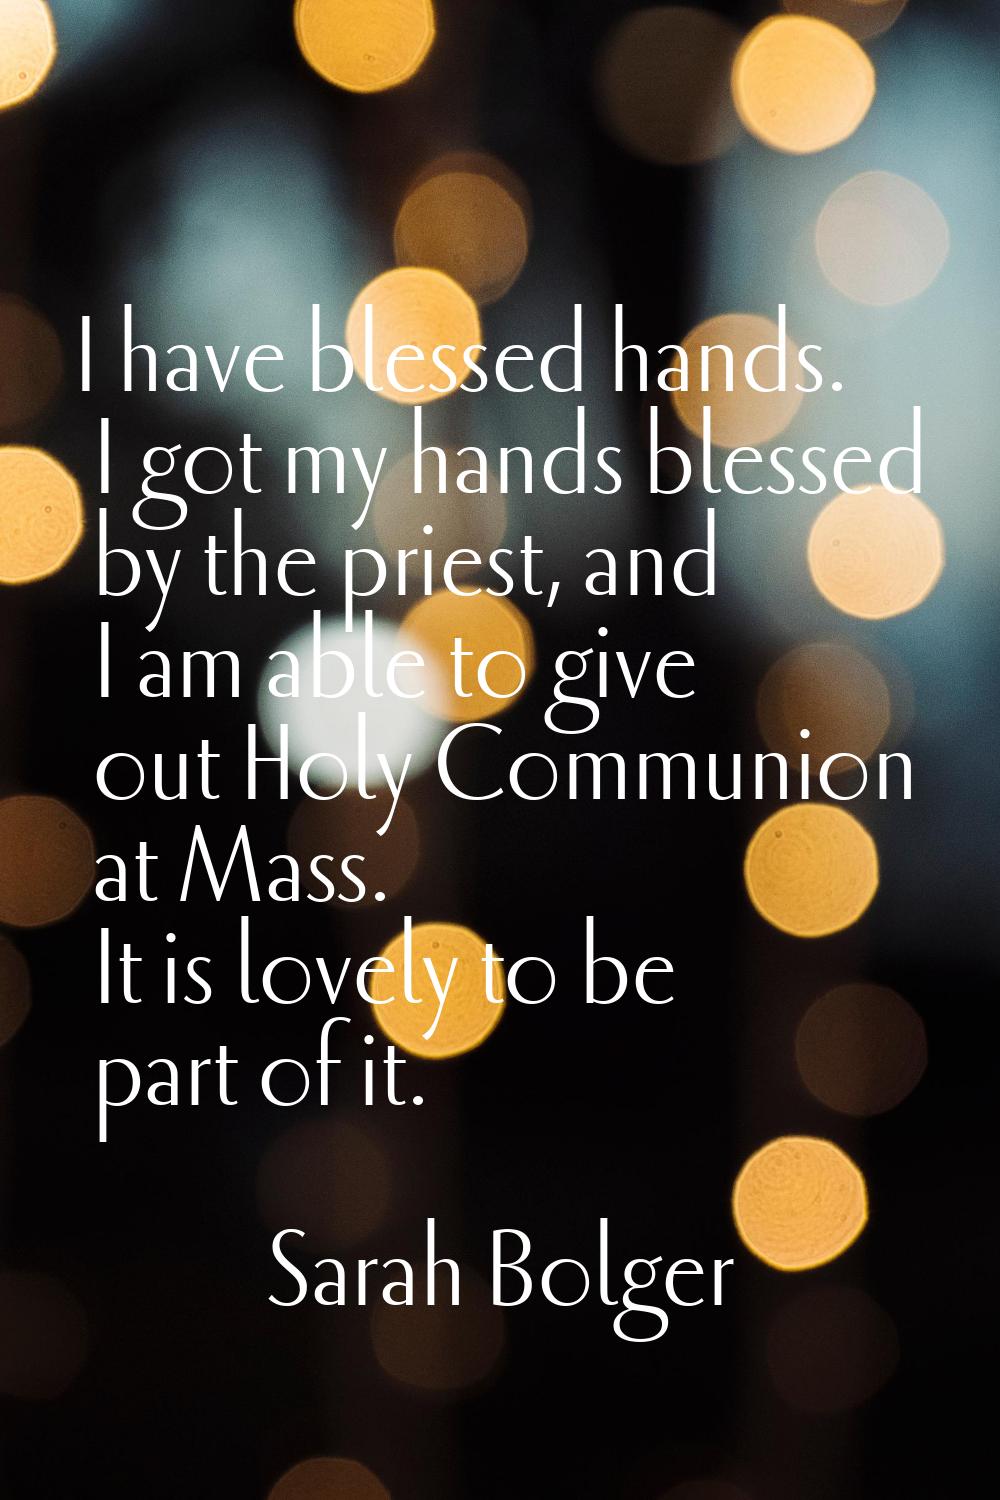 I have blessed hands. I got my hands blessed by the priest, and I am able to give out Holy Communio